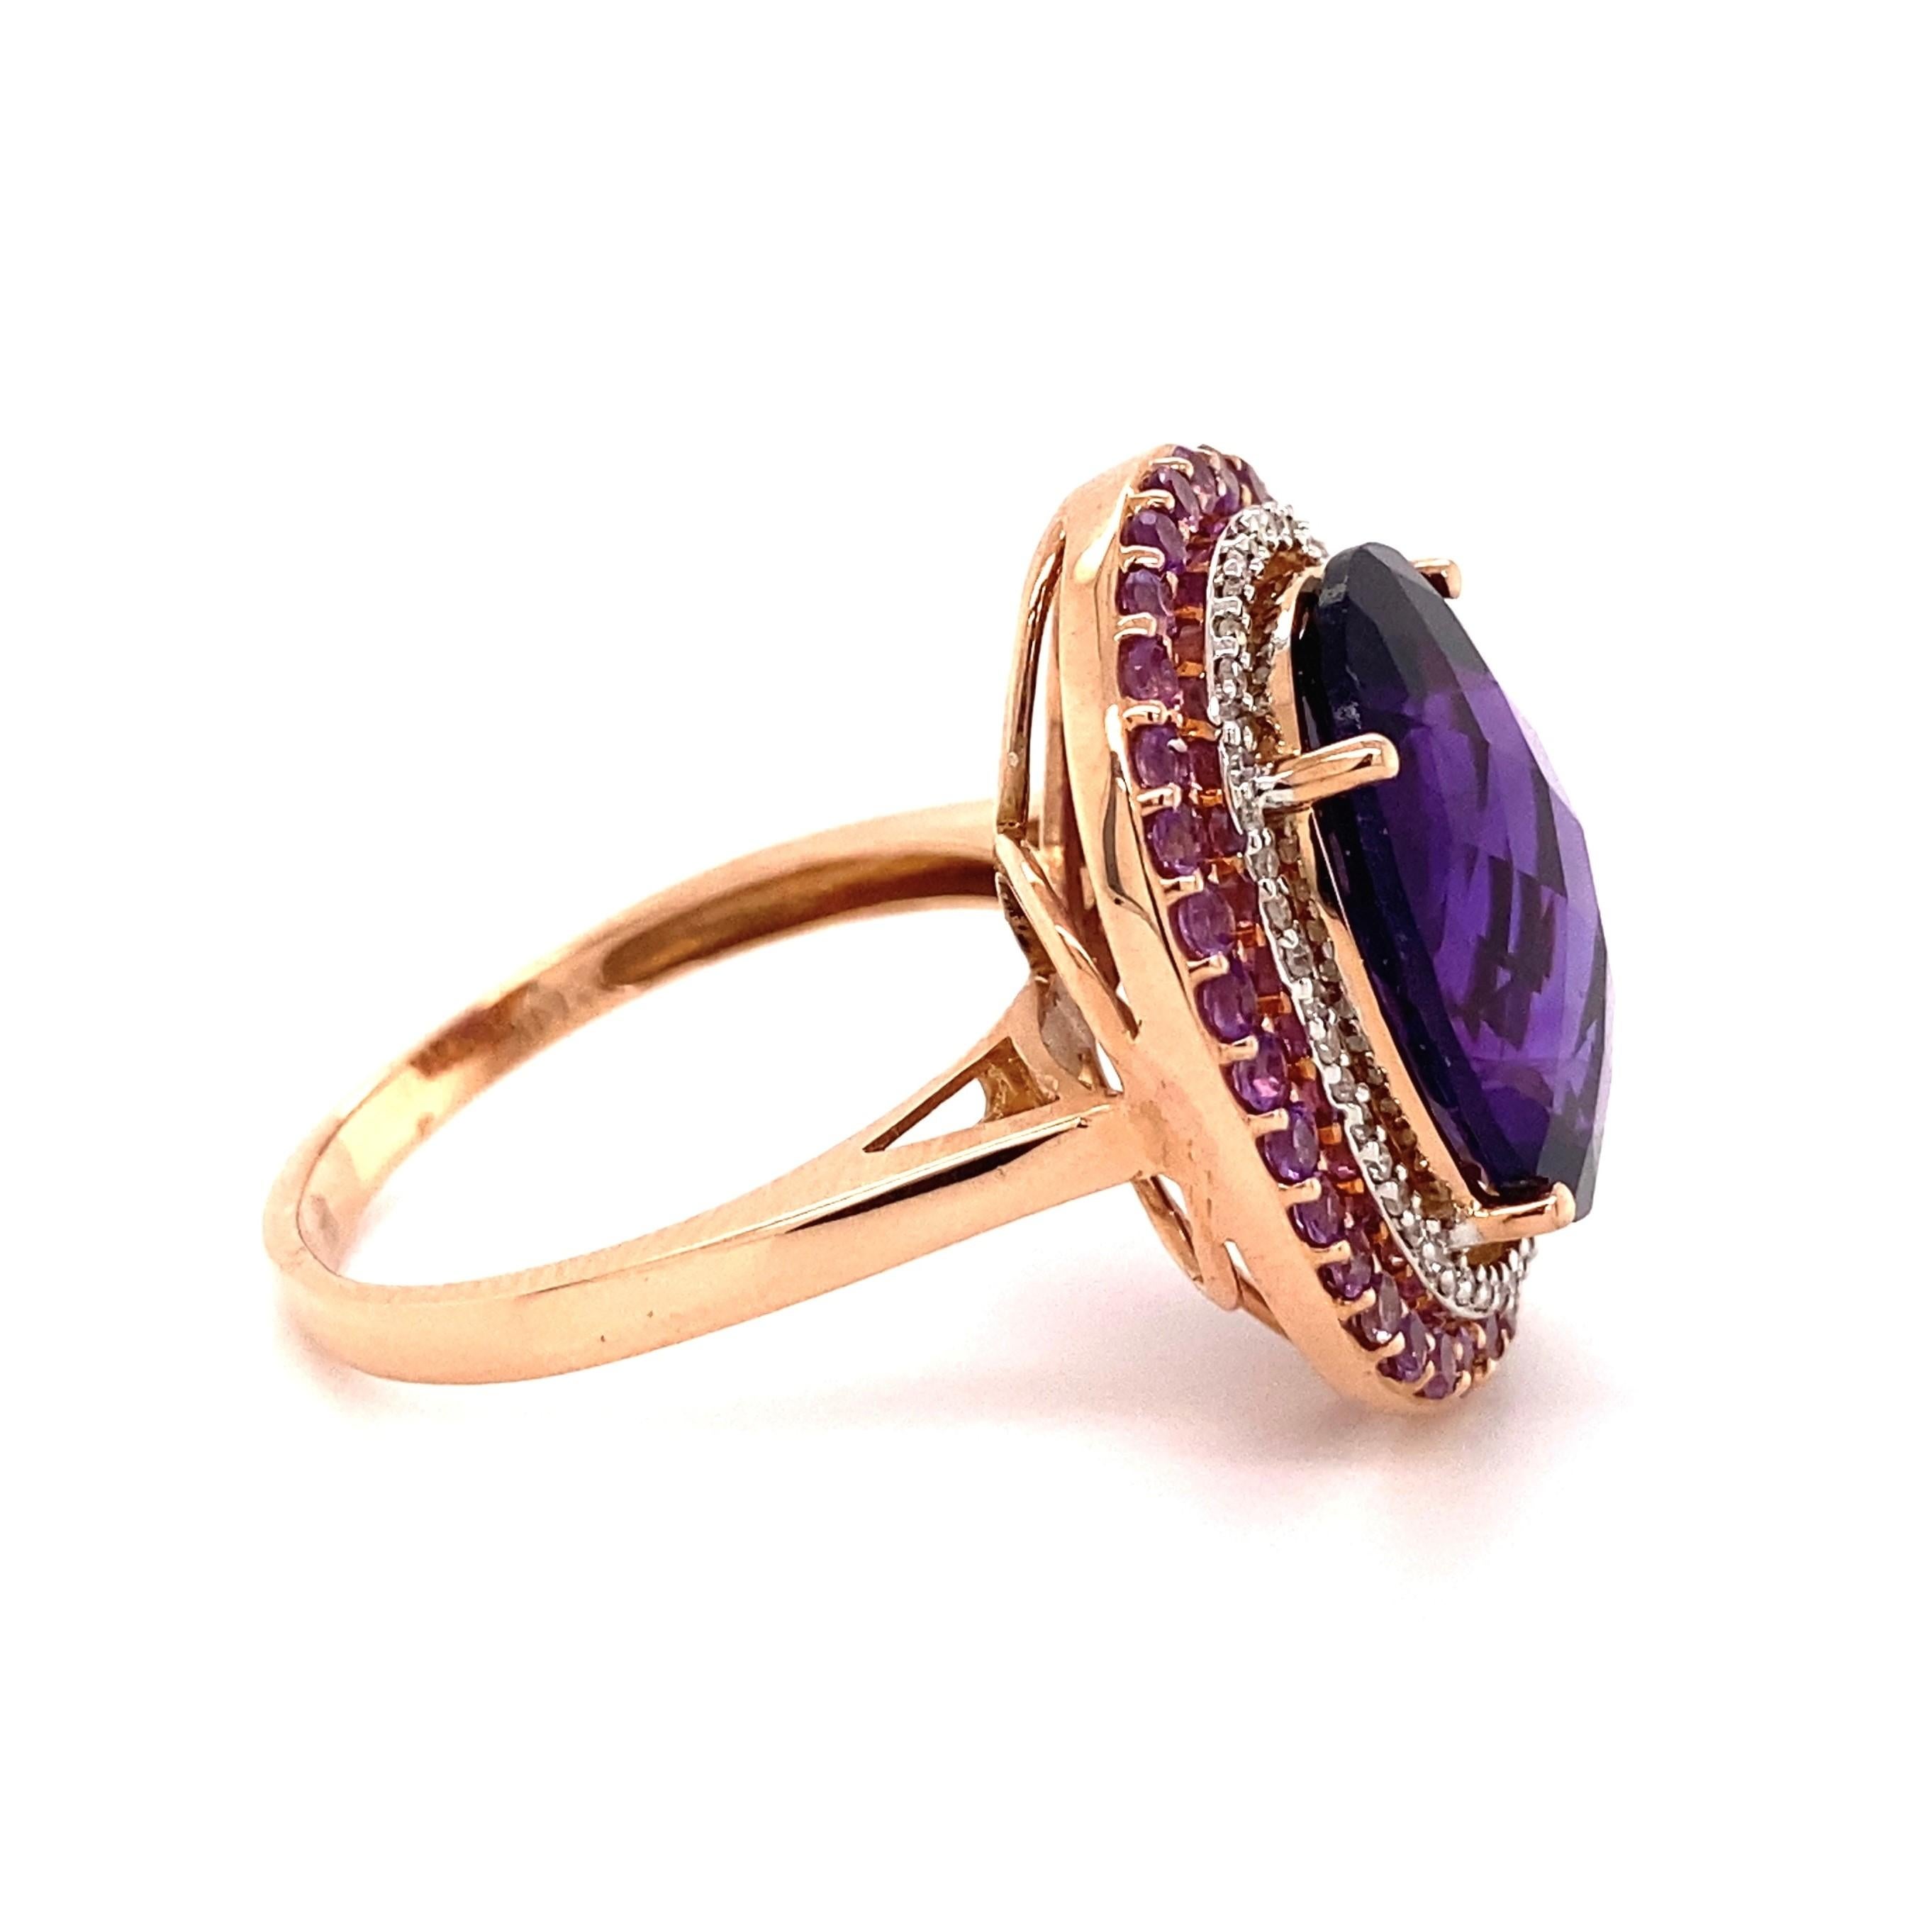 Amethyst and Diamond Cocktail Ring, securely centered by an Oval Amethyst, surrounded by Amethyst, approx. 12.24tcw and Diamonds, approx. 0.21tcw. Beautifully ‘wrapped’ Hand crafted 14K Rose Gold mounting. Approx. Dimensions: 1.43” l x 0.95” w x